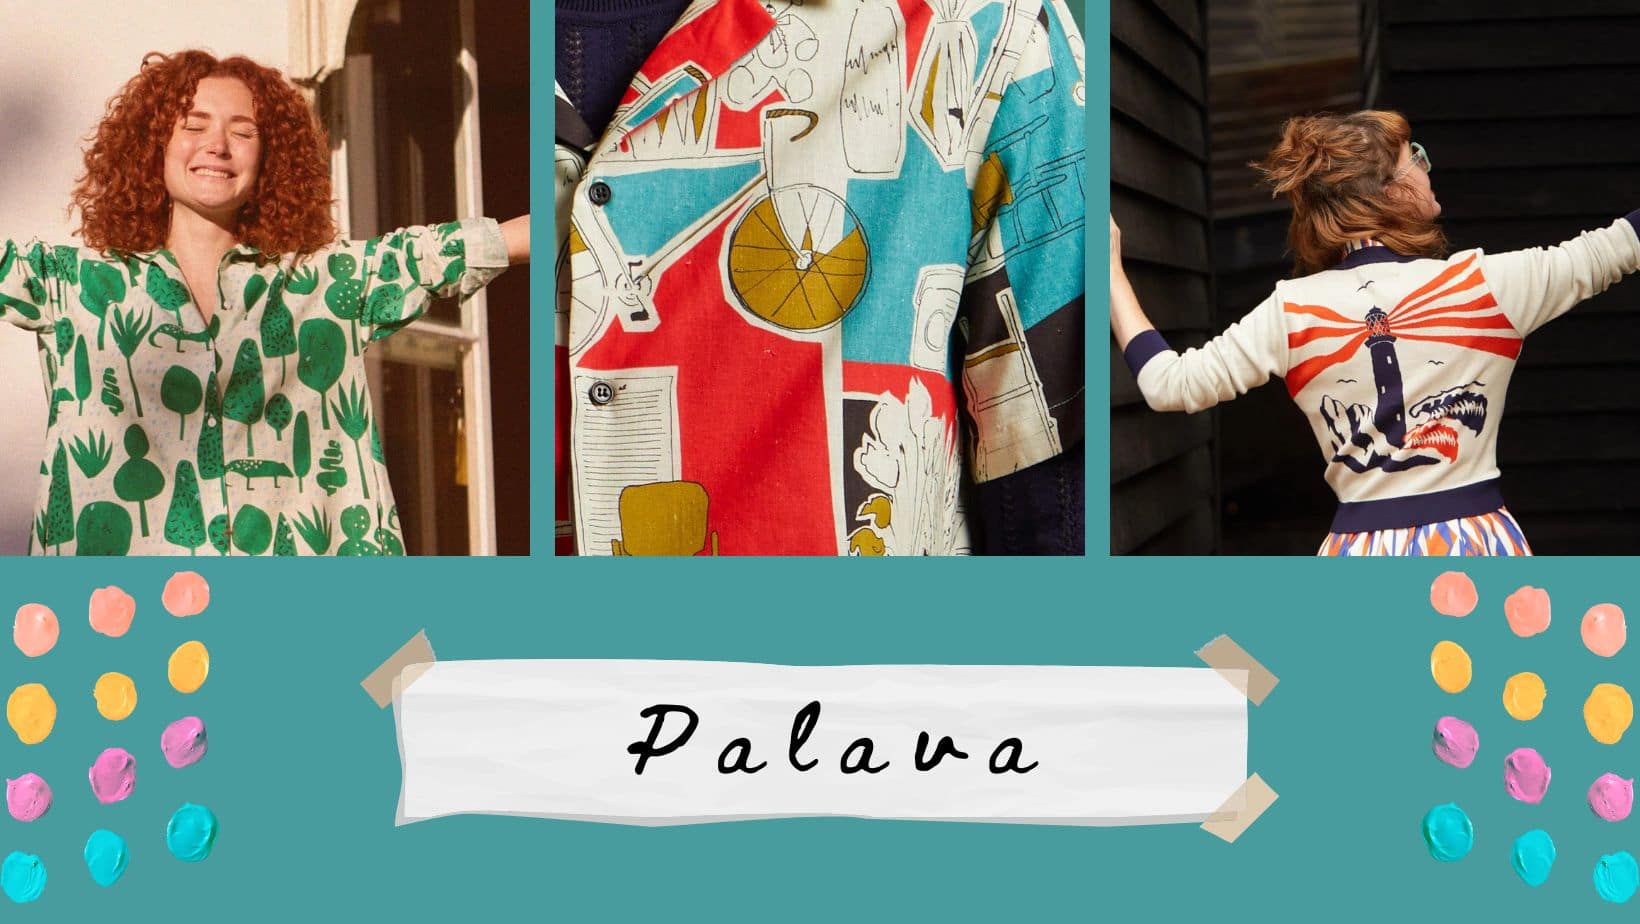 Palava – The Playful and Sustainable Clothing Brand